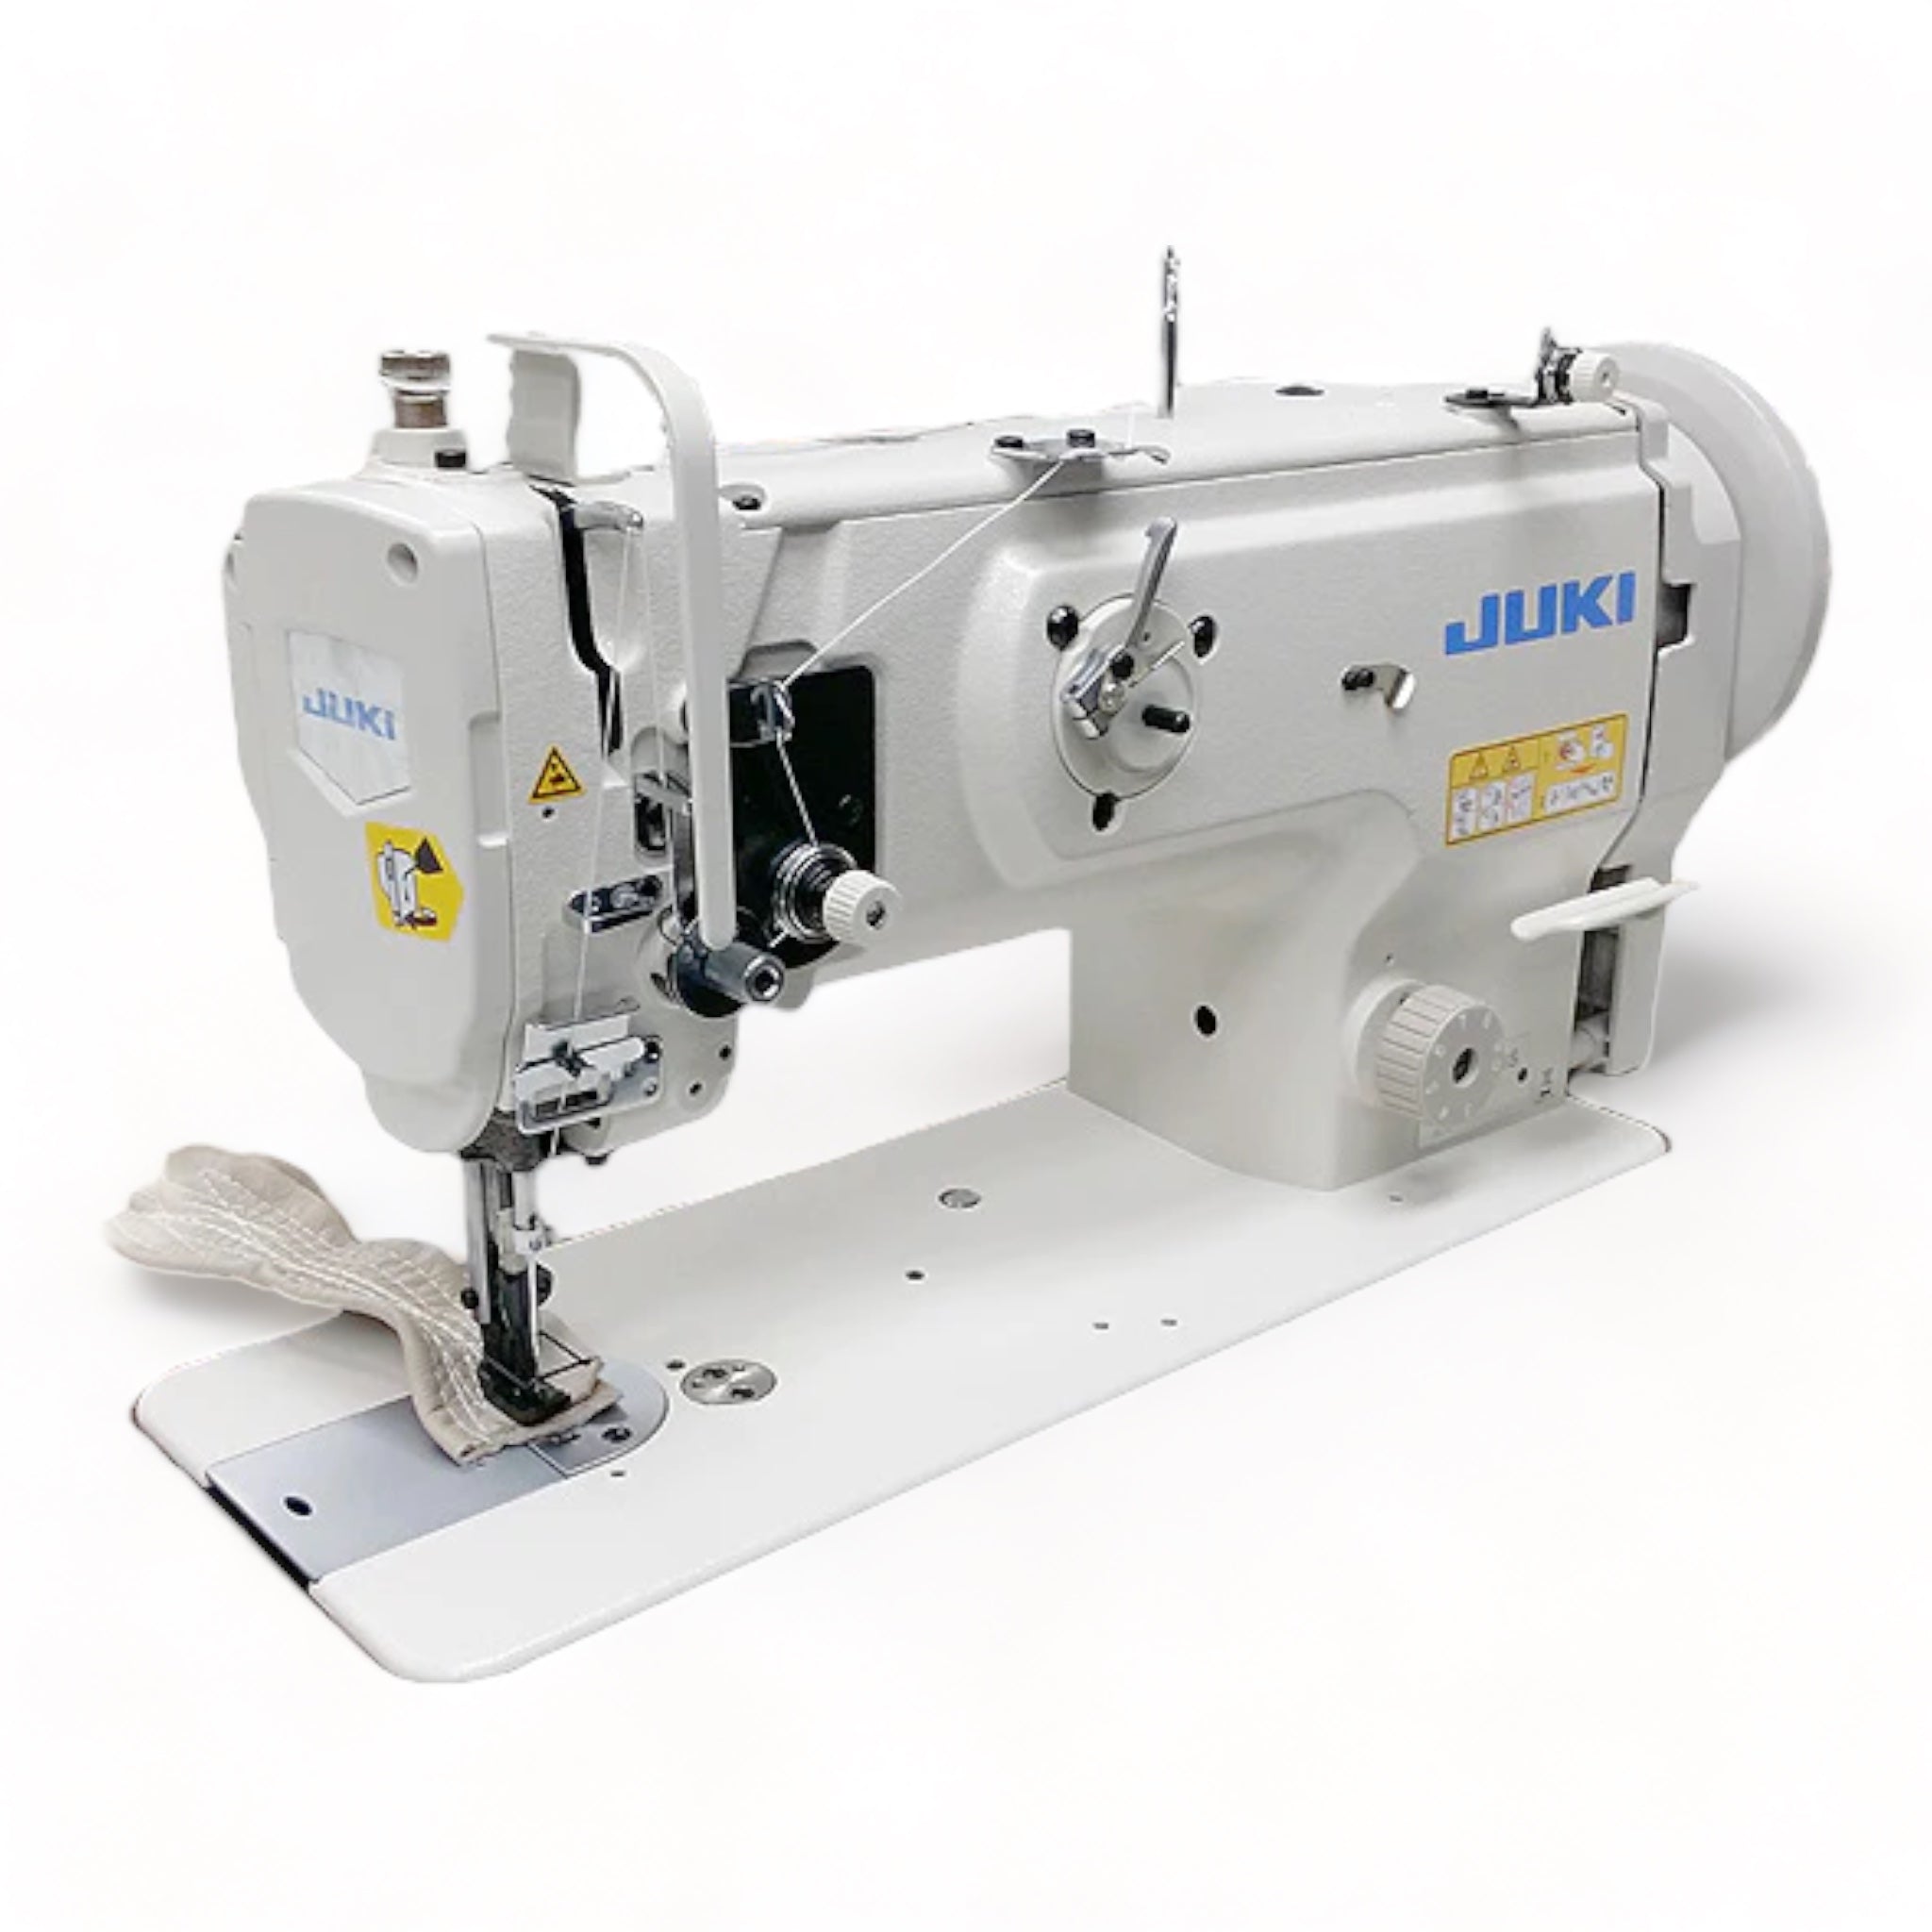 JUKI DNU-1541 Single Needle Heavy Duty Unison Feed Walking Foot Sewing Machine Assembled with Servo Motor, Table and Stand Included